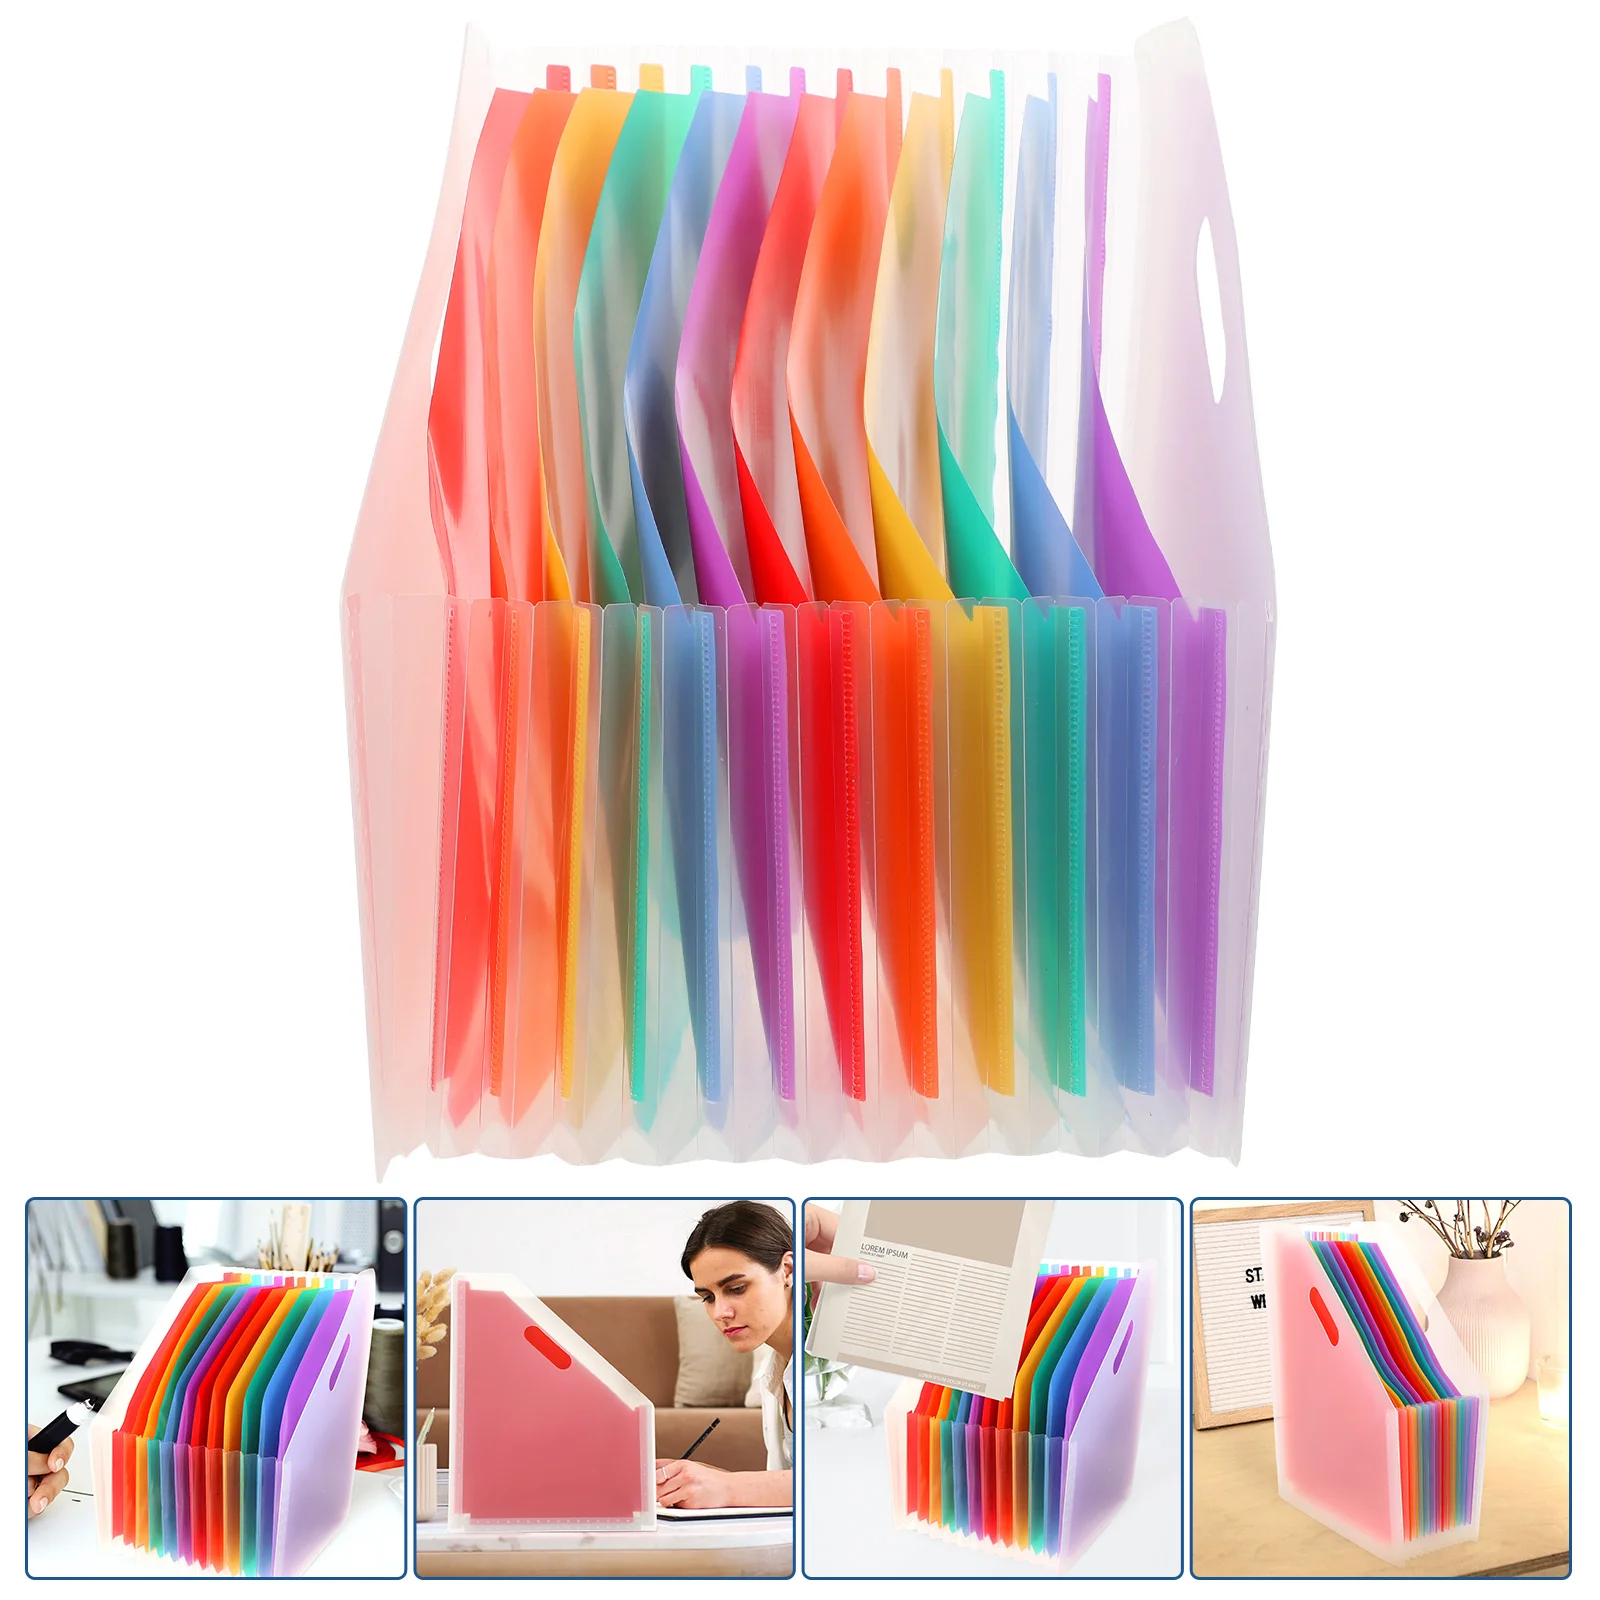 

A4 Accordian Expanding File Pockets Rainbow Organ Storage Expander File Folder Storage For Office Expanding School Clip